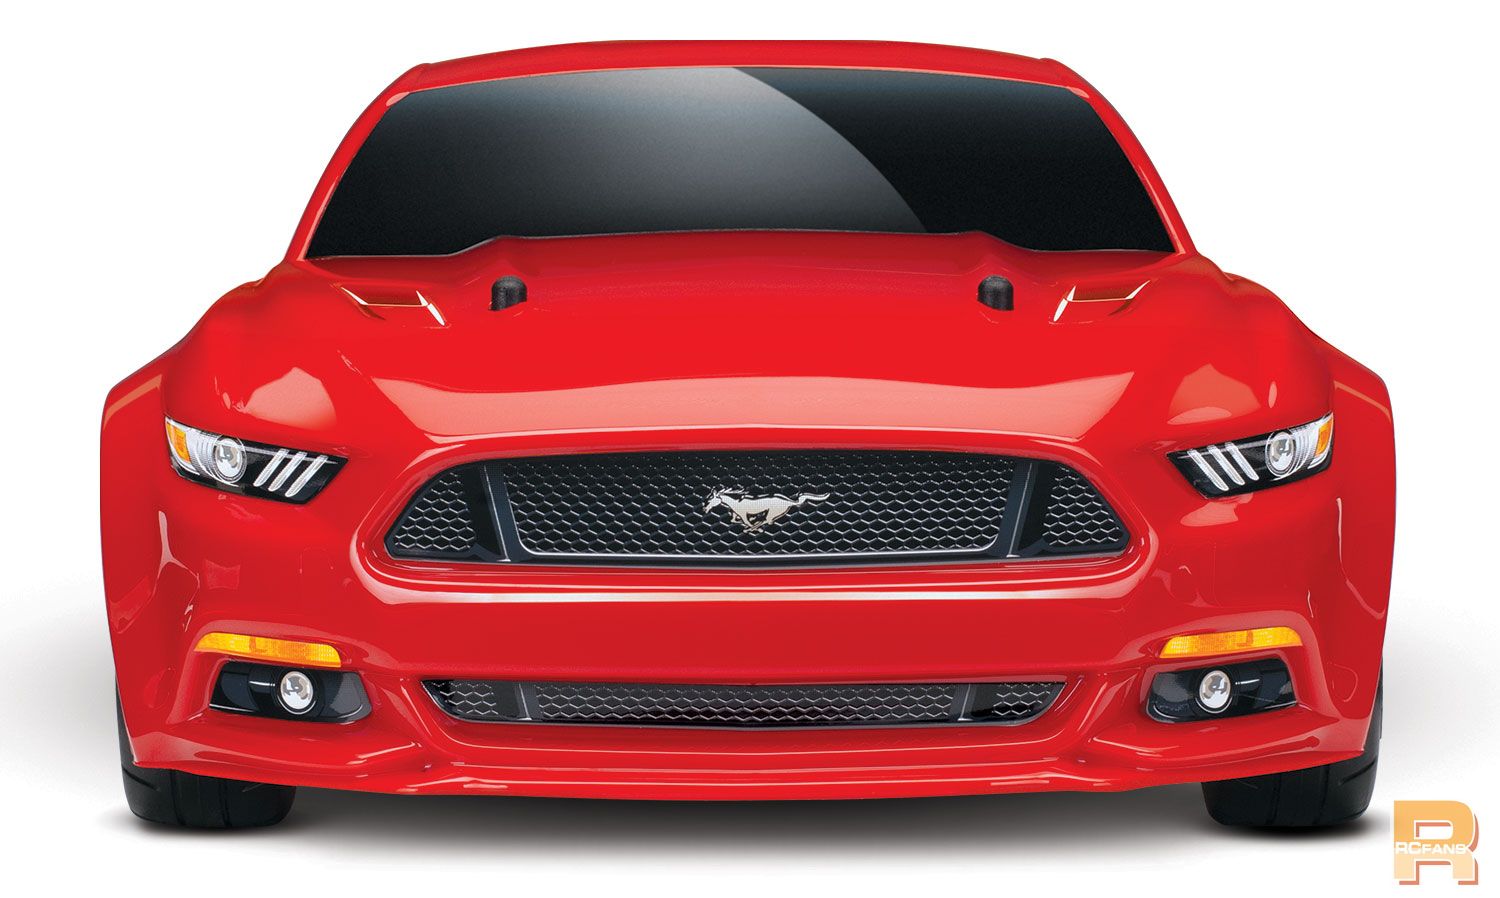 83044-4-Mustang-Red-front.jpg